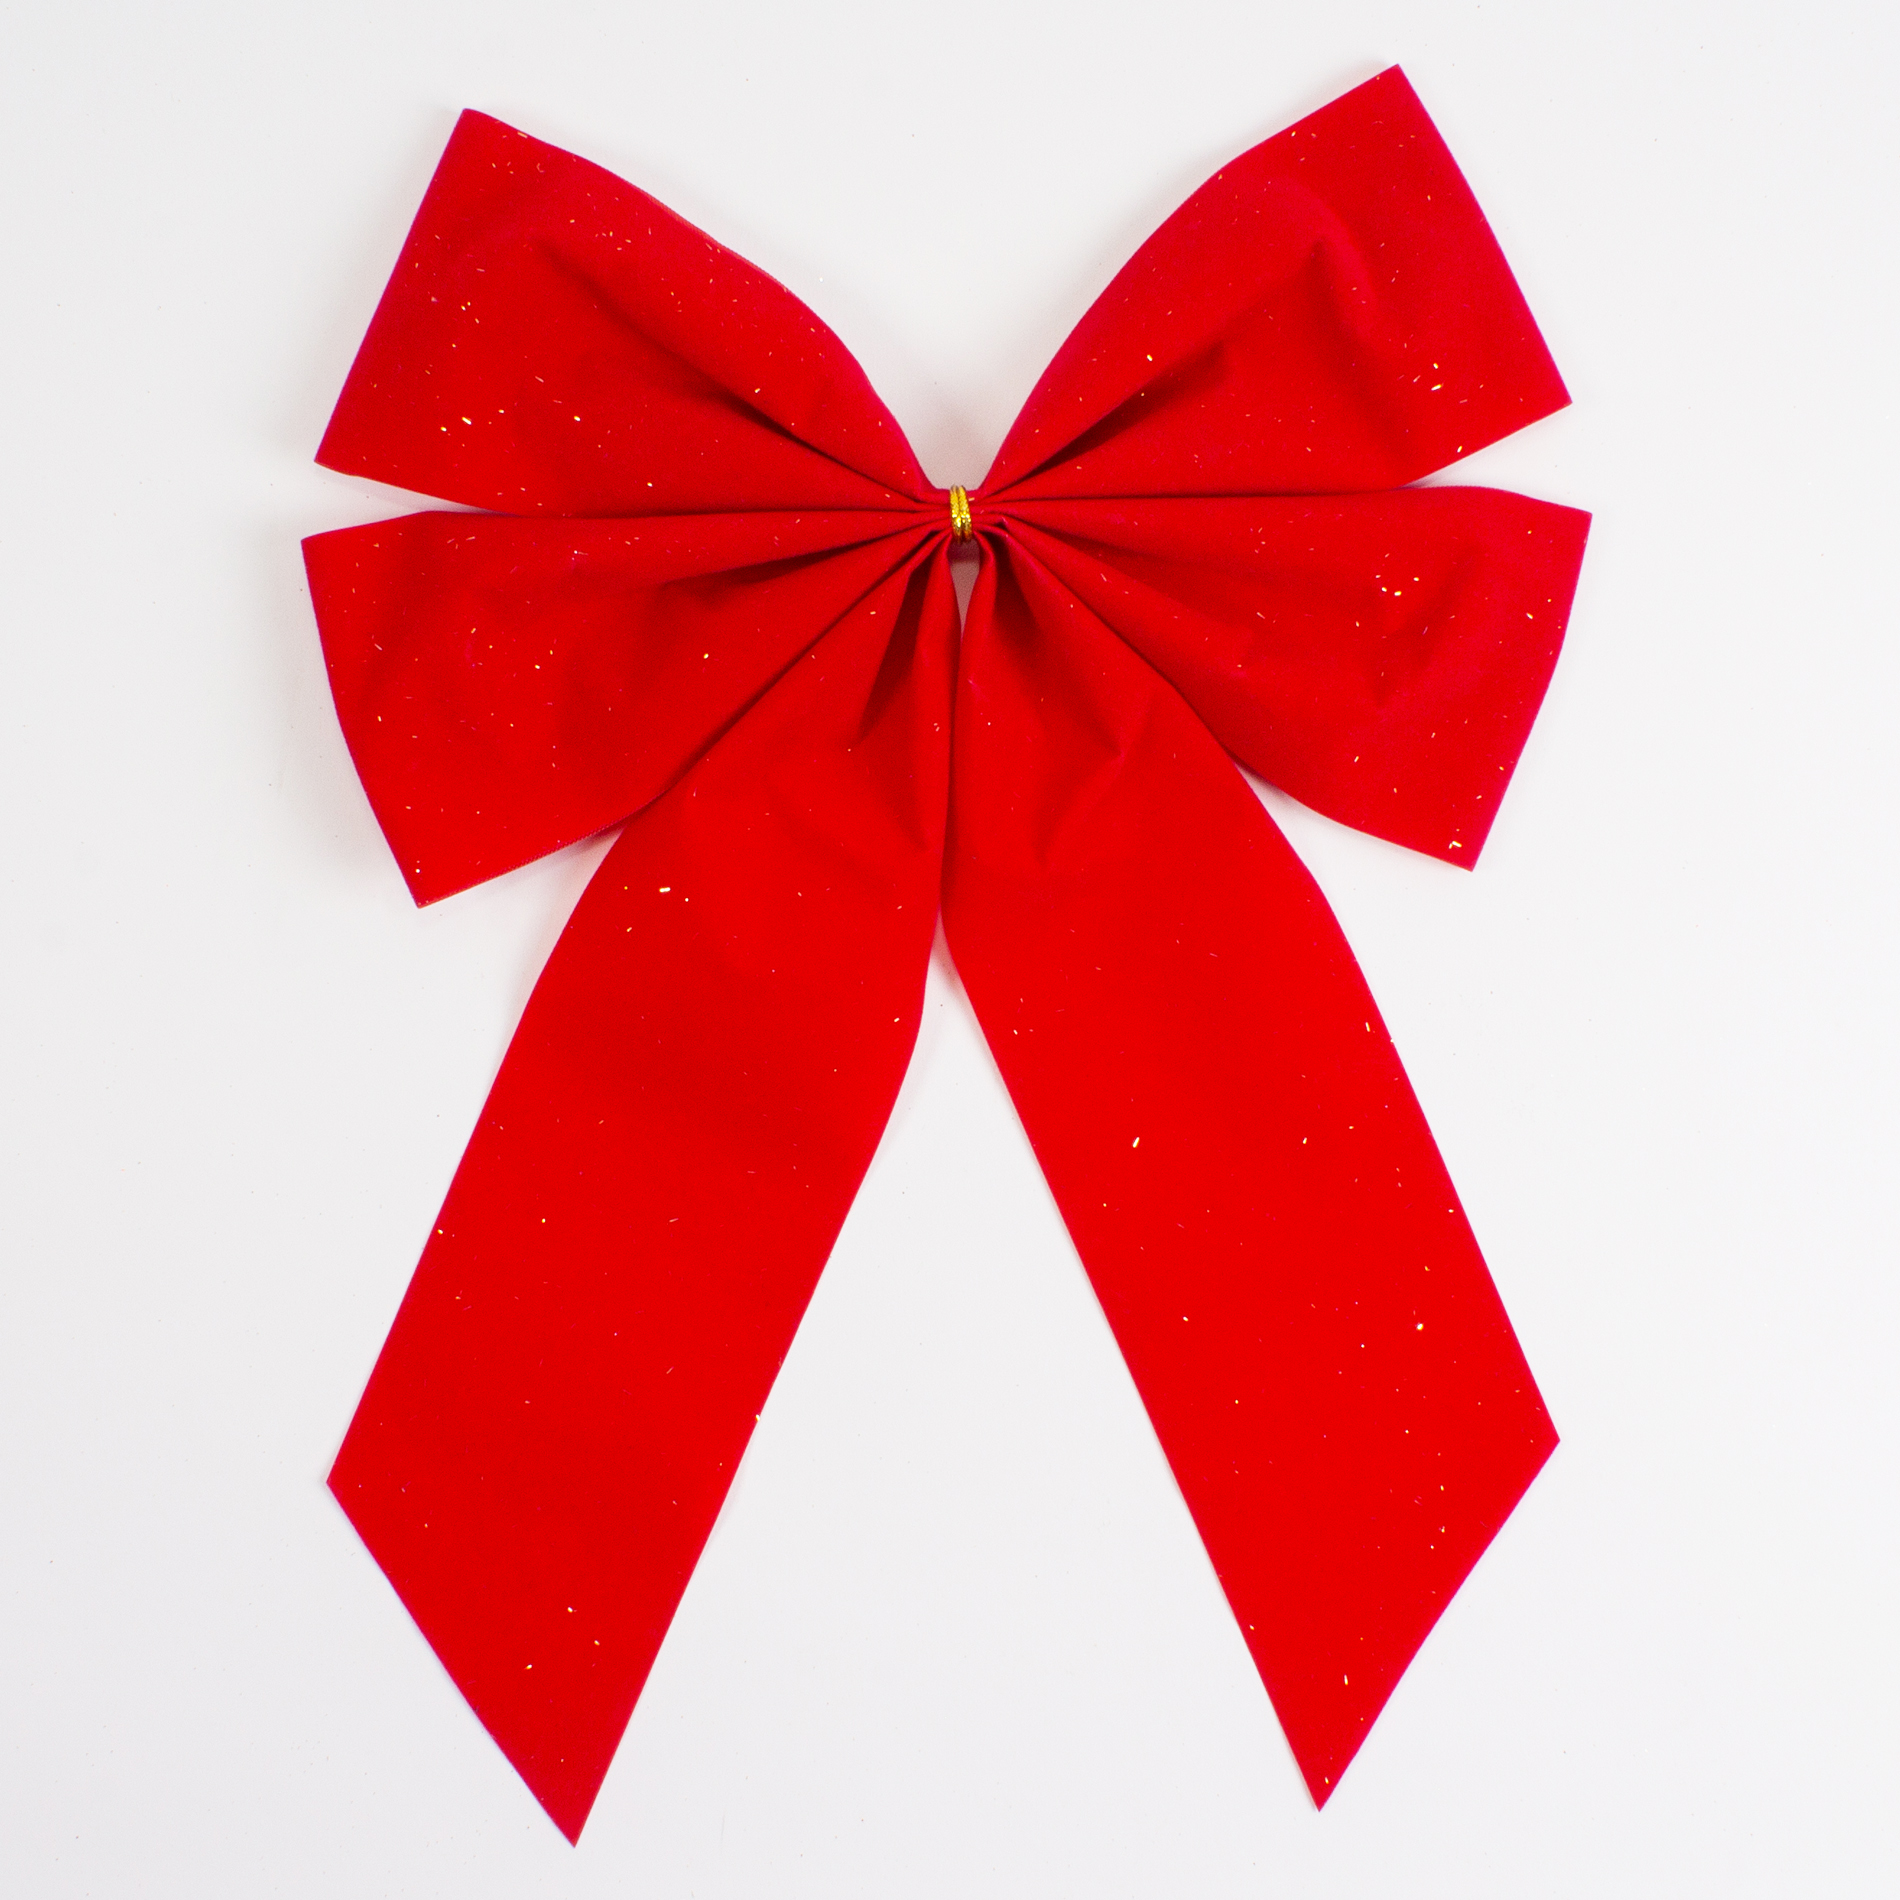 Trim-a-Home Large Red Wreath Bow